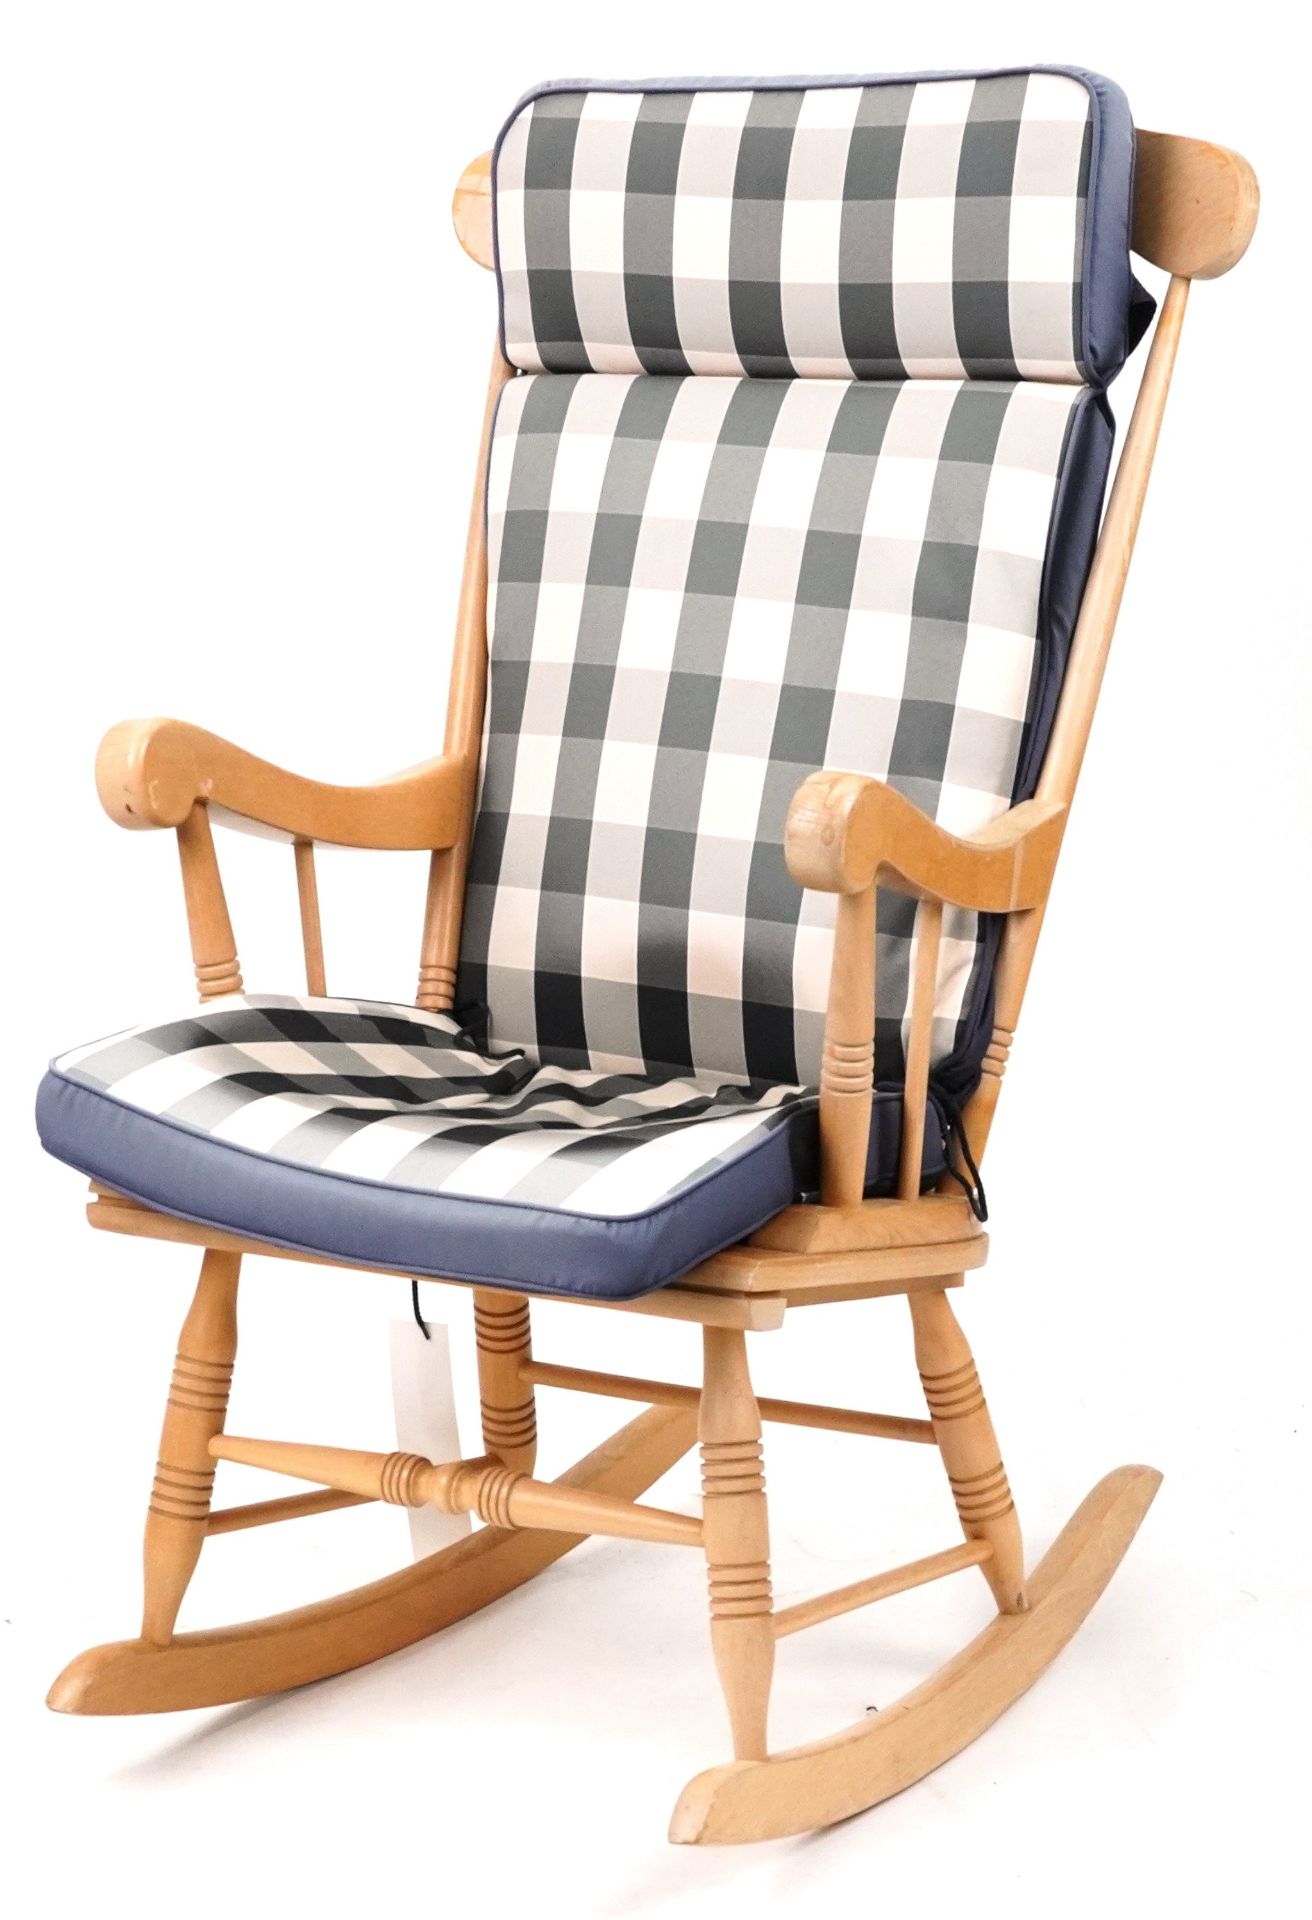 Lightwood rocking chair with check upholstered cushions, 102cm high